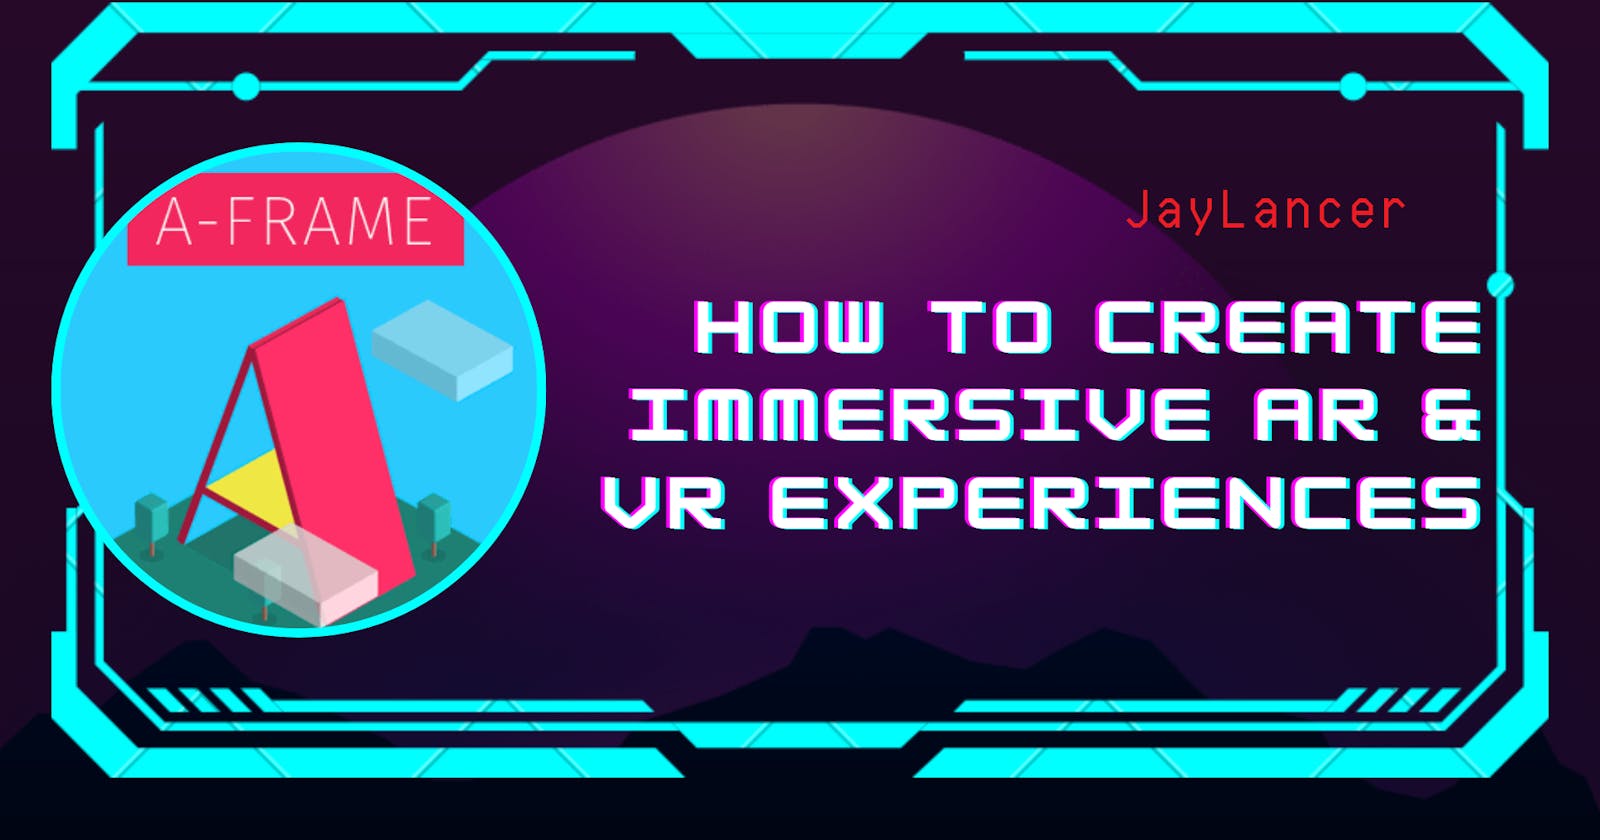 Discover How to Create Immersive AR & VR Experiences with A-frame!